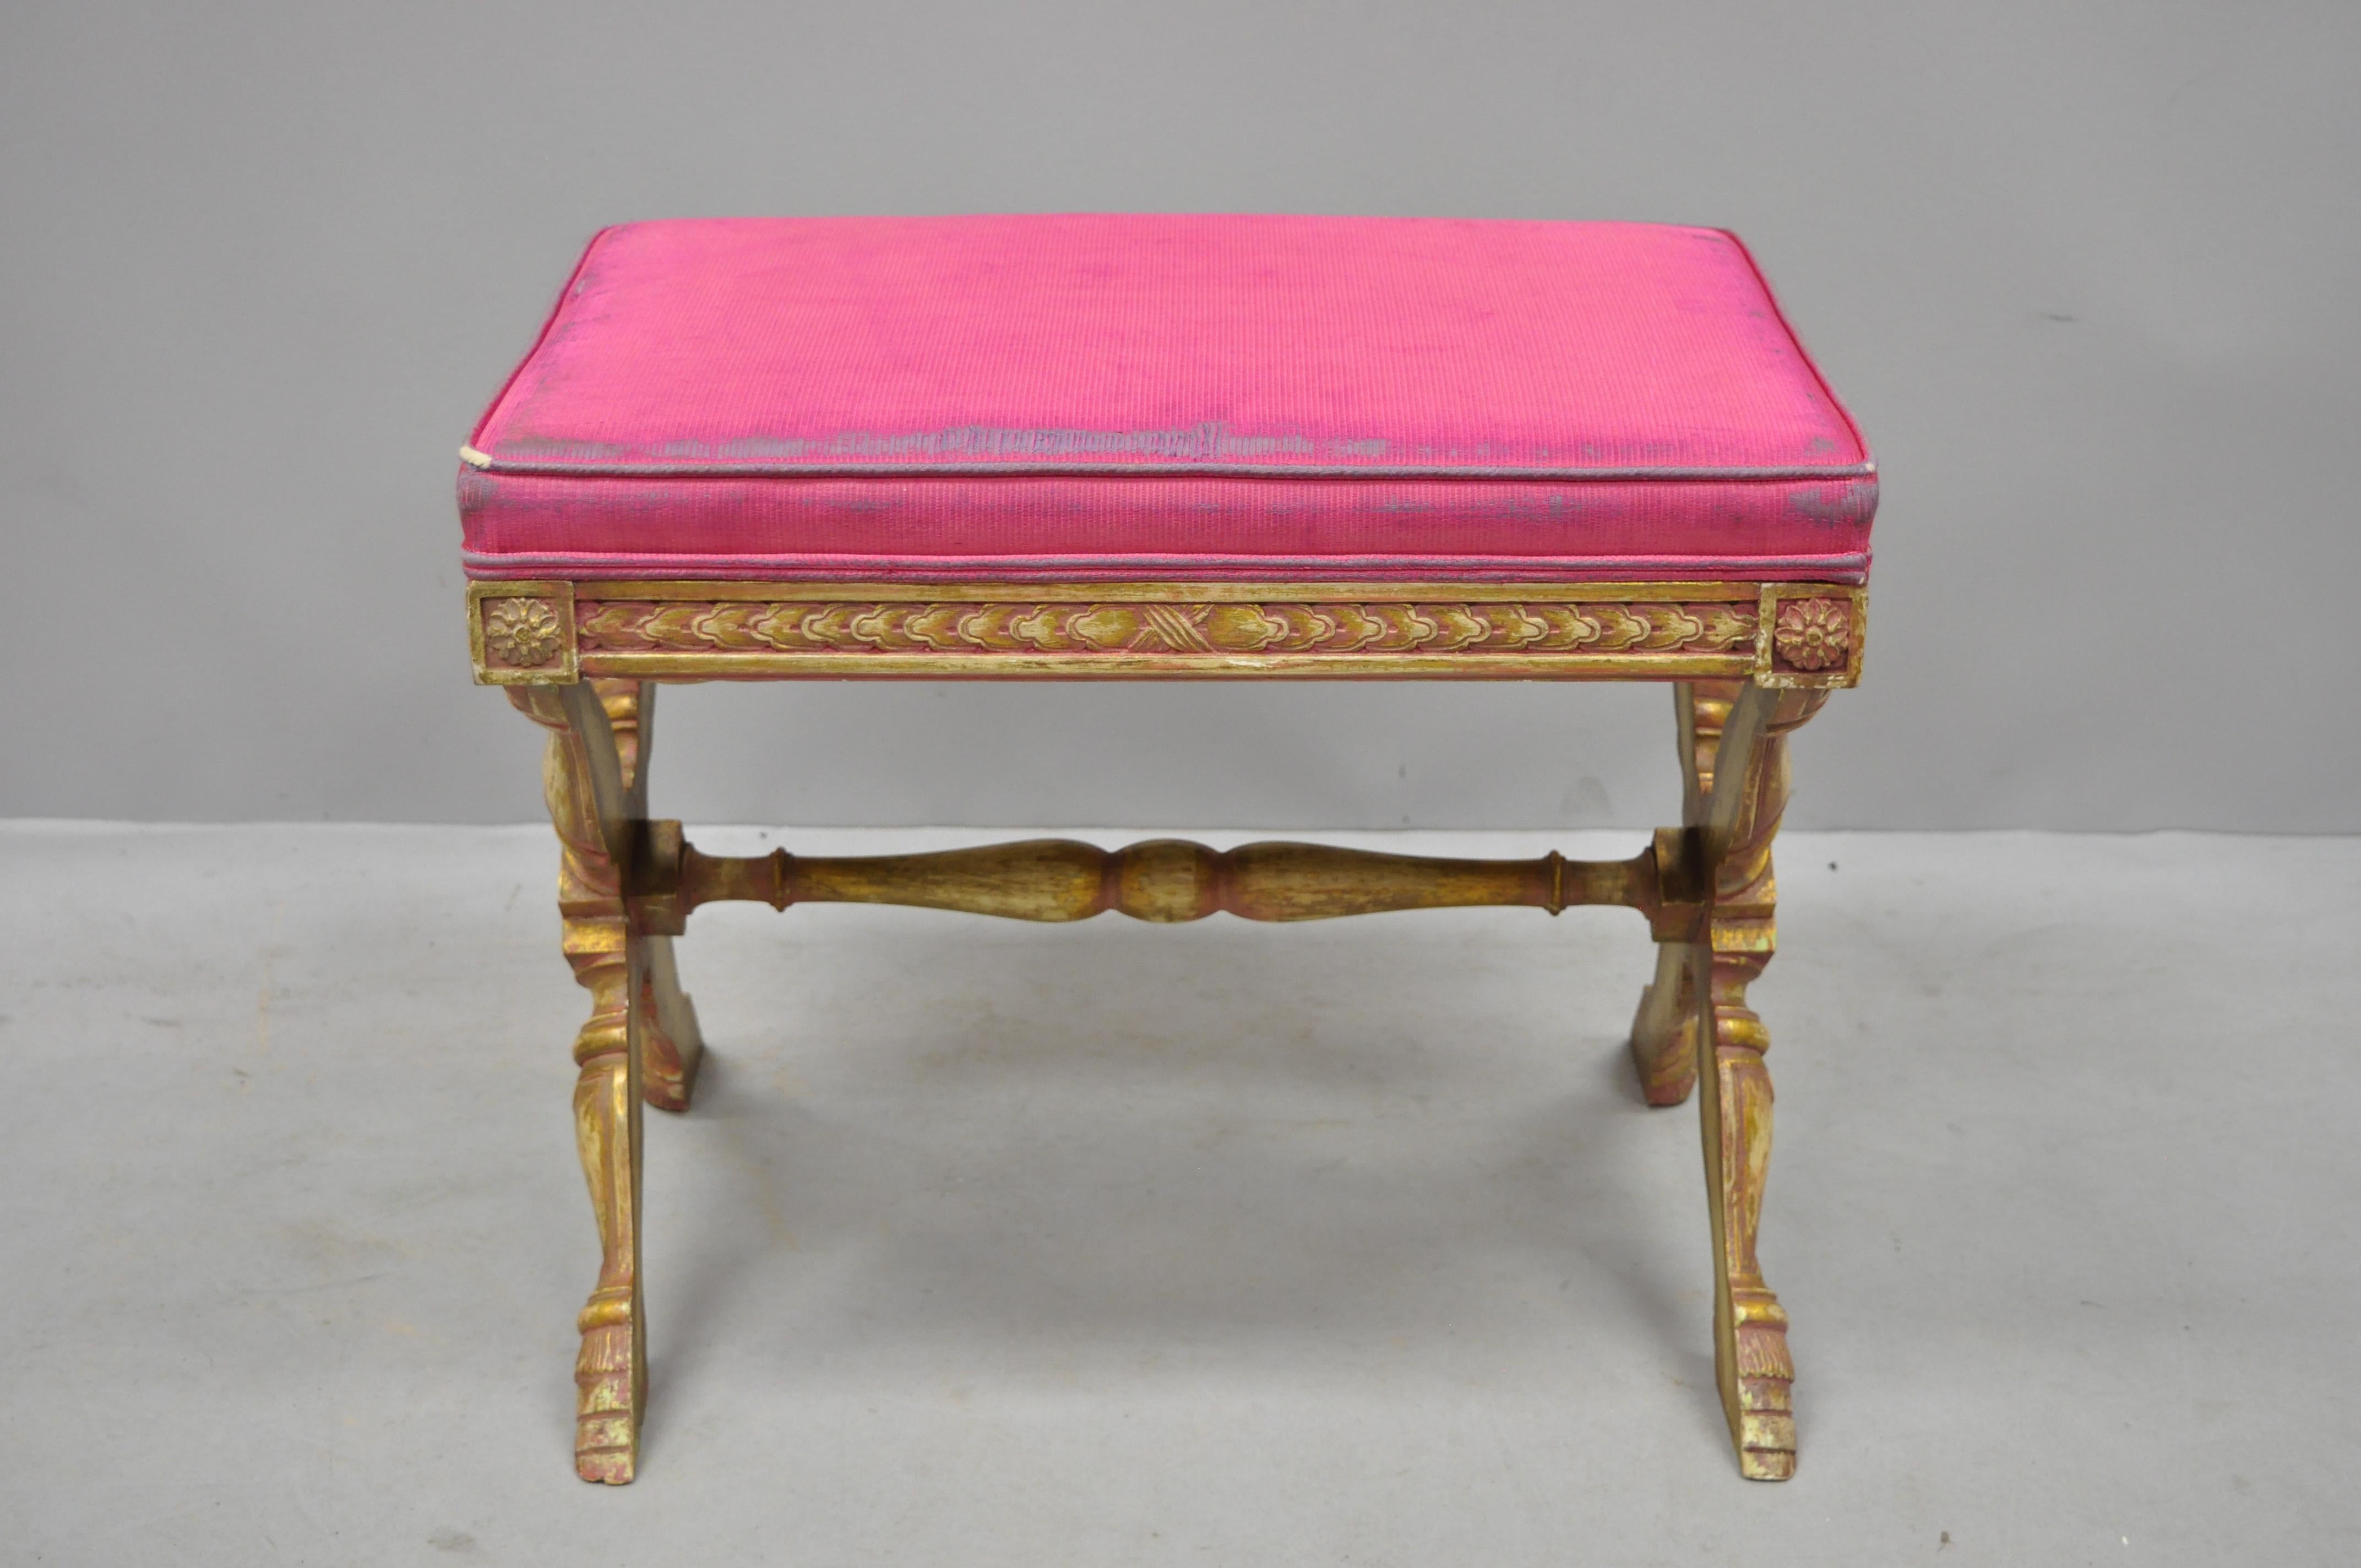 Early 20th century pink distress painted Italian Regency X-frame hoof foot stool. Item features pink and gold distress painted finish, X-frame with stretcher support, hairy hoof feet, nicely carved details, great style and form, circa early 20th